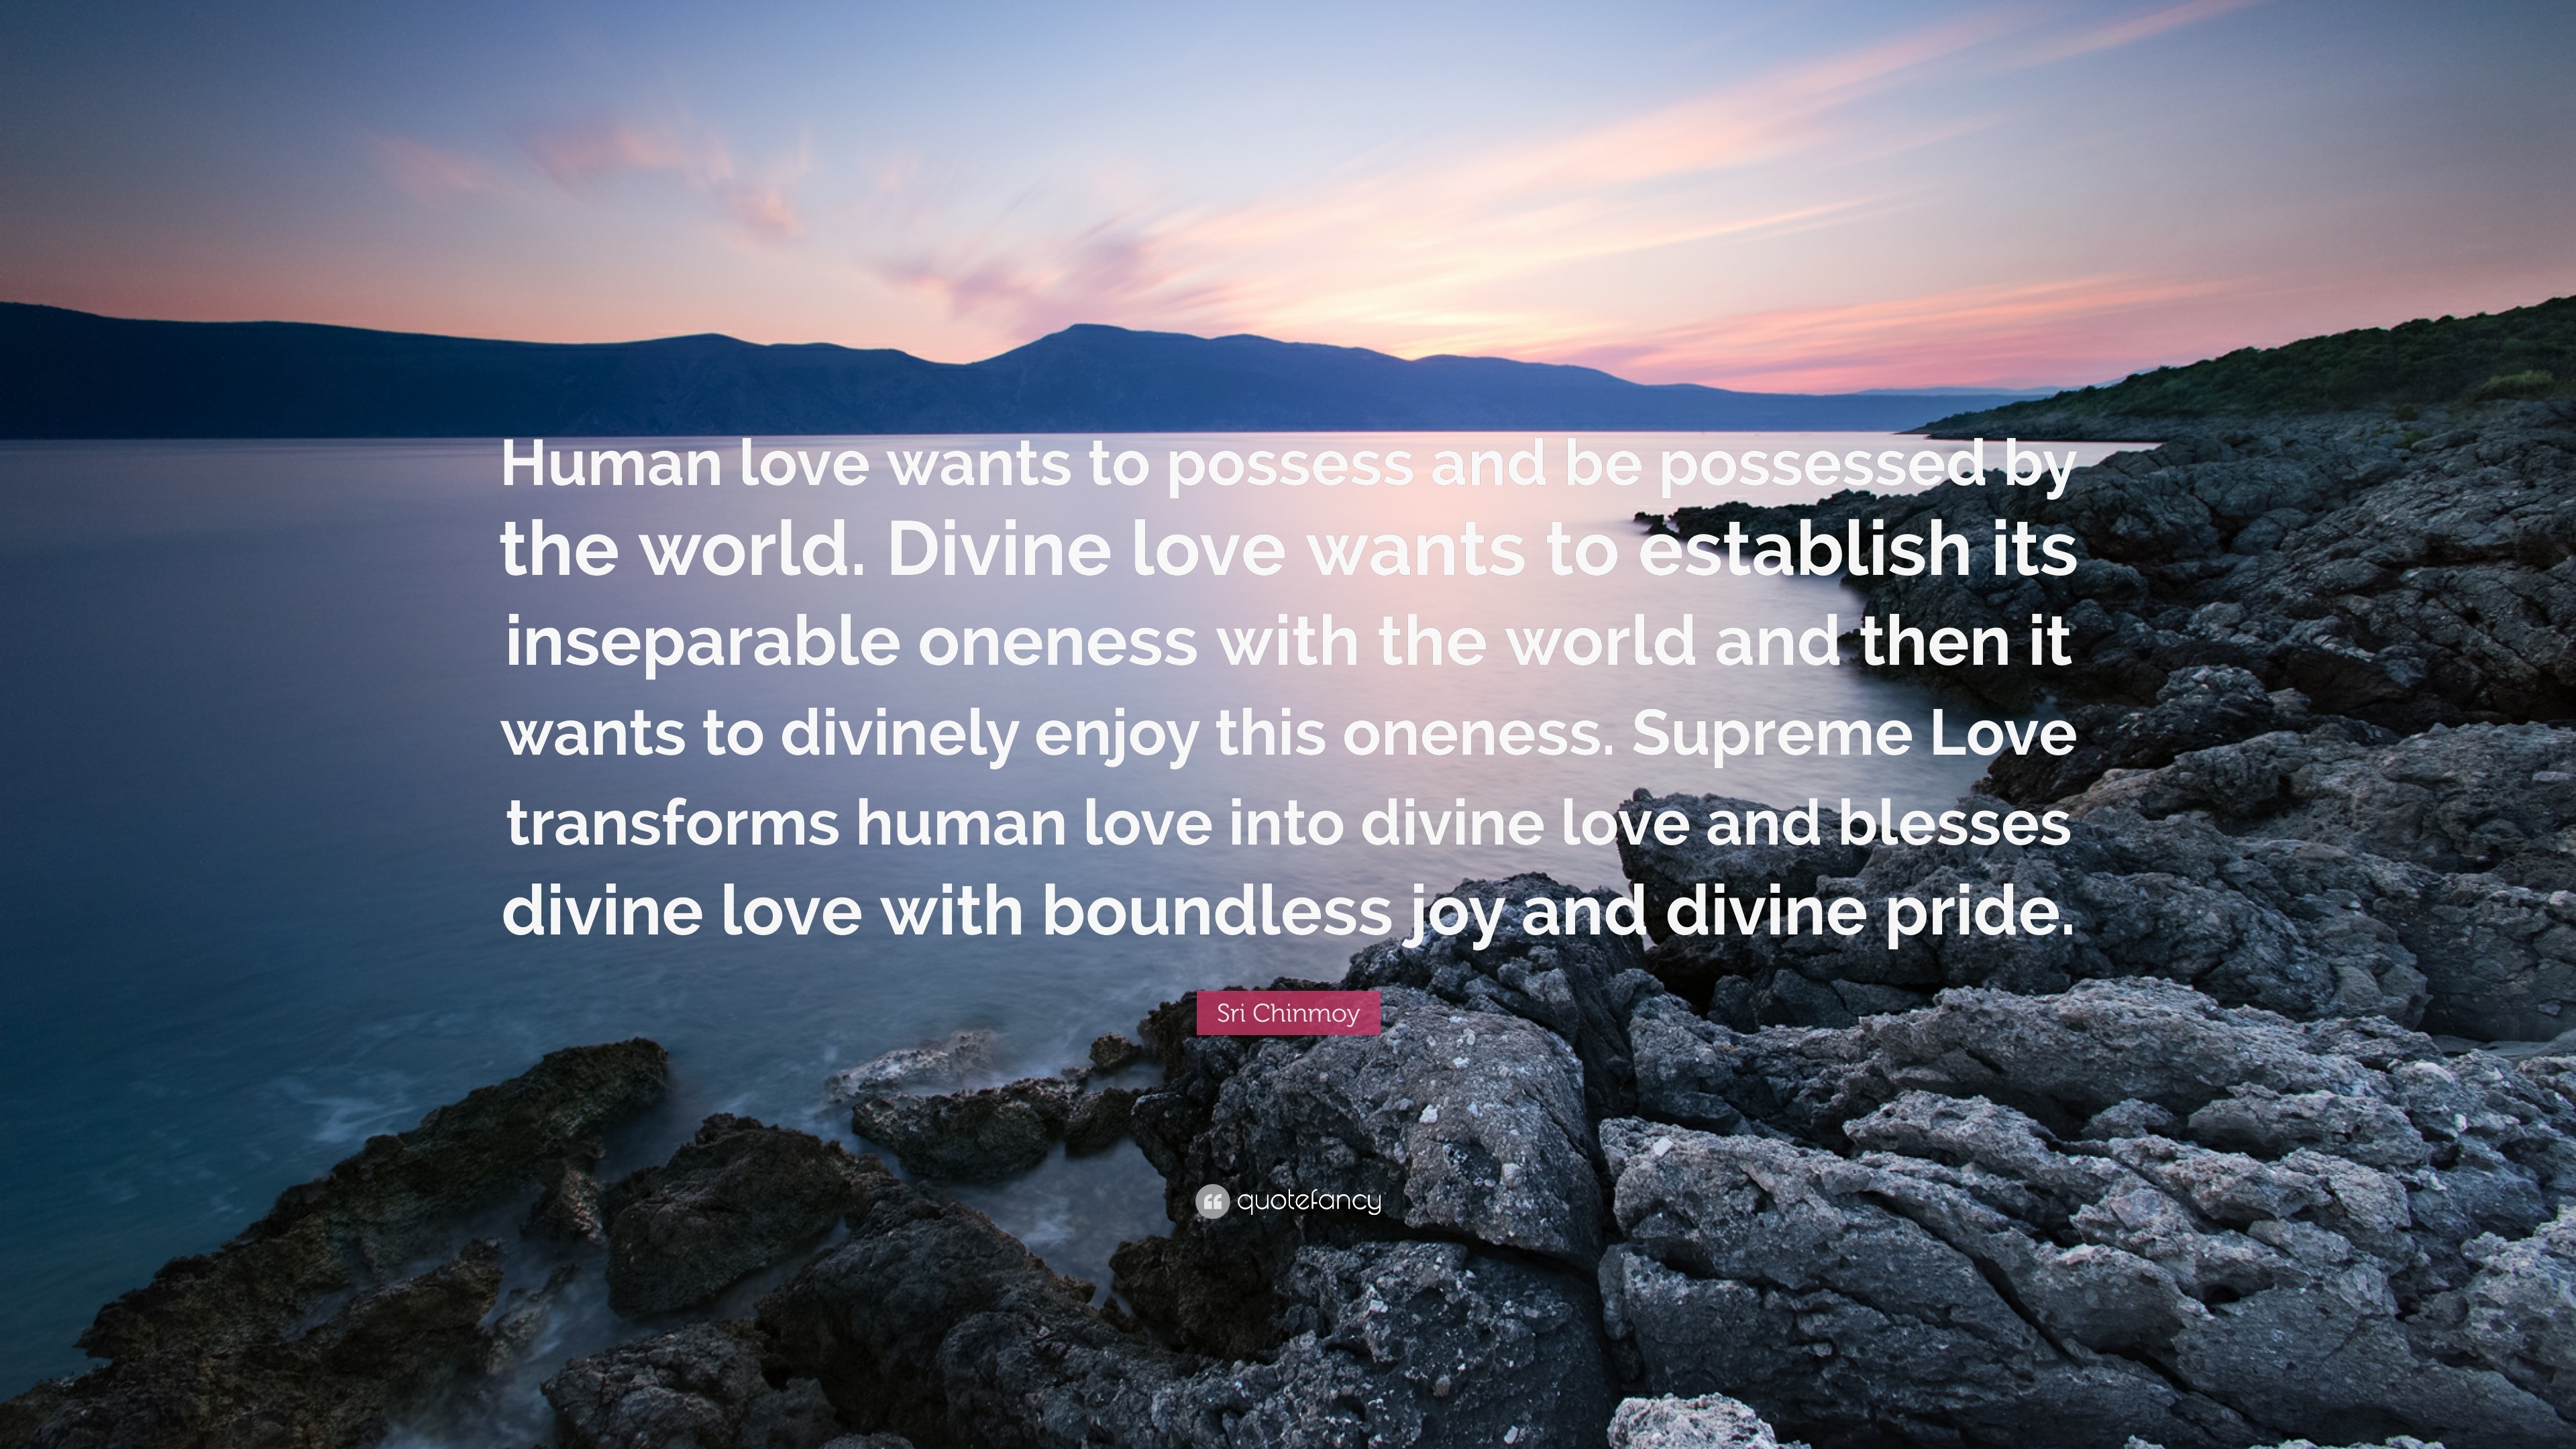 Sri Chinmoy Quote: “Human love wants to possess and be possessed by the  world. Divine love wants to establish its inseparable oneness with t”